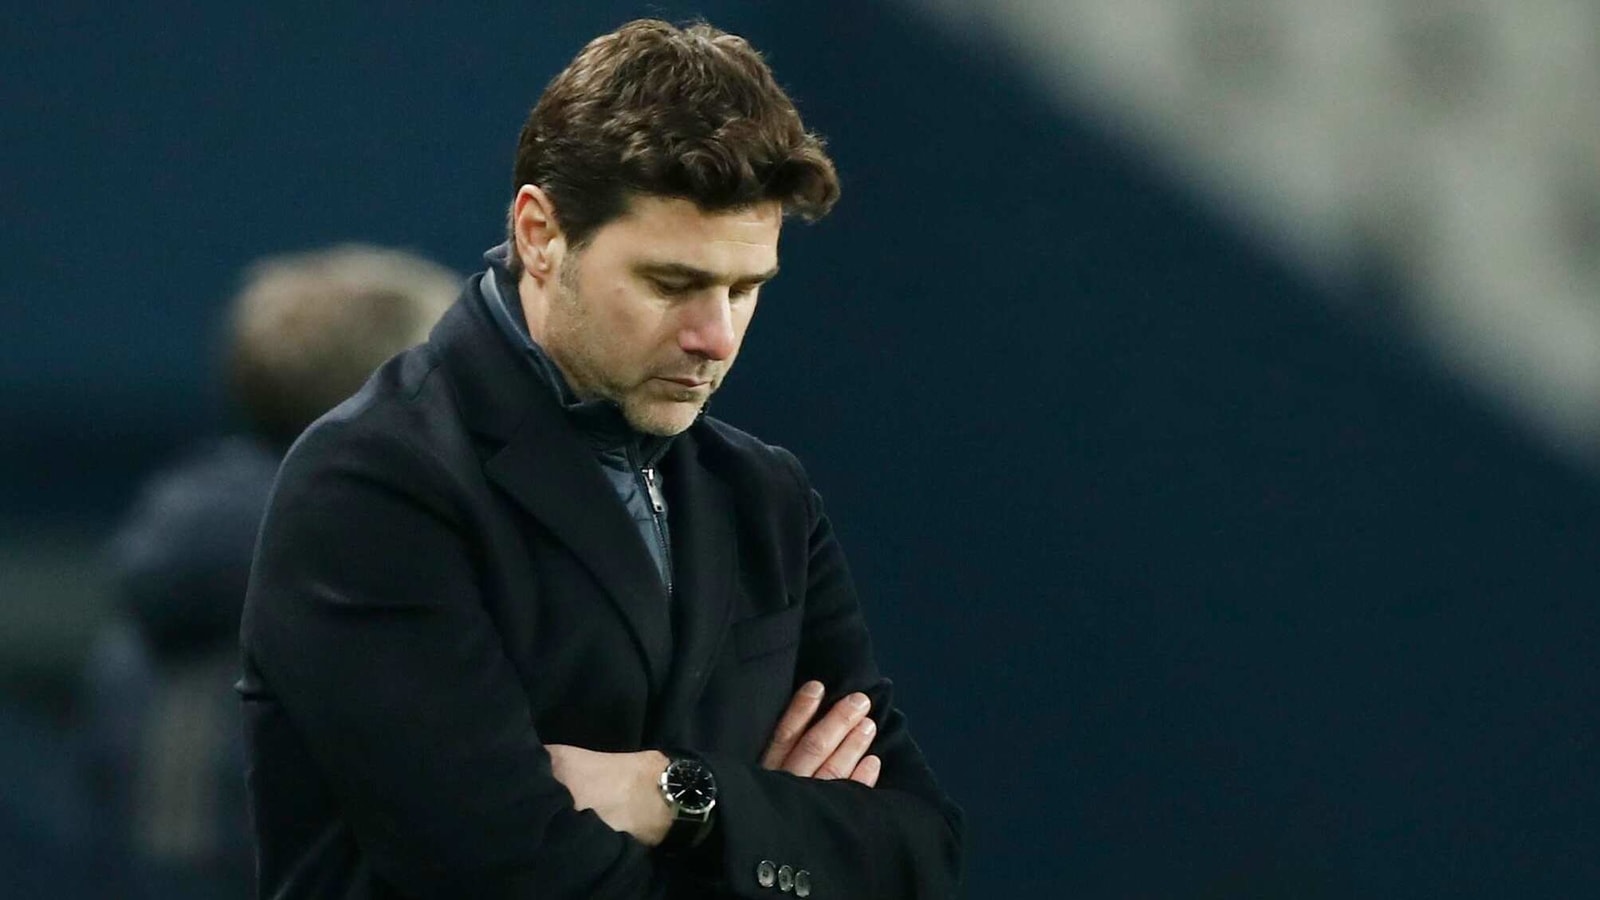 PSG manager Pochettino tests positive for Covid19, to miss Angers game